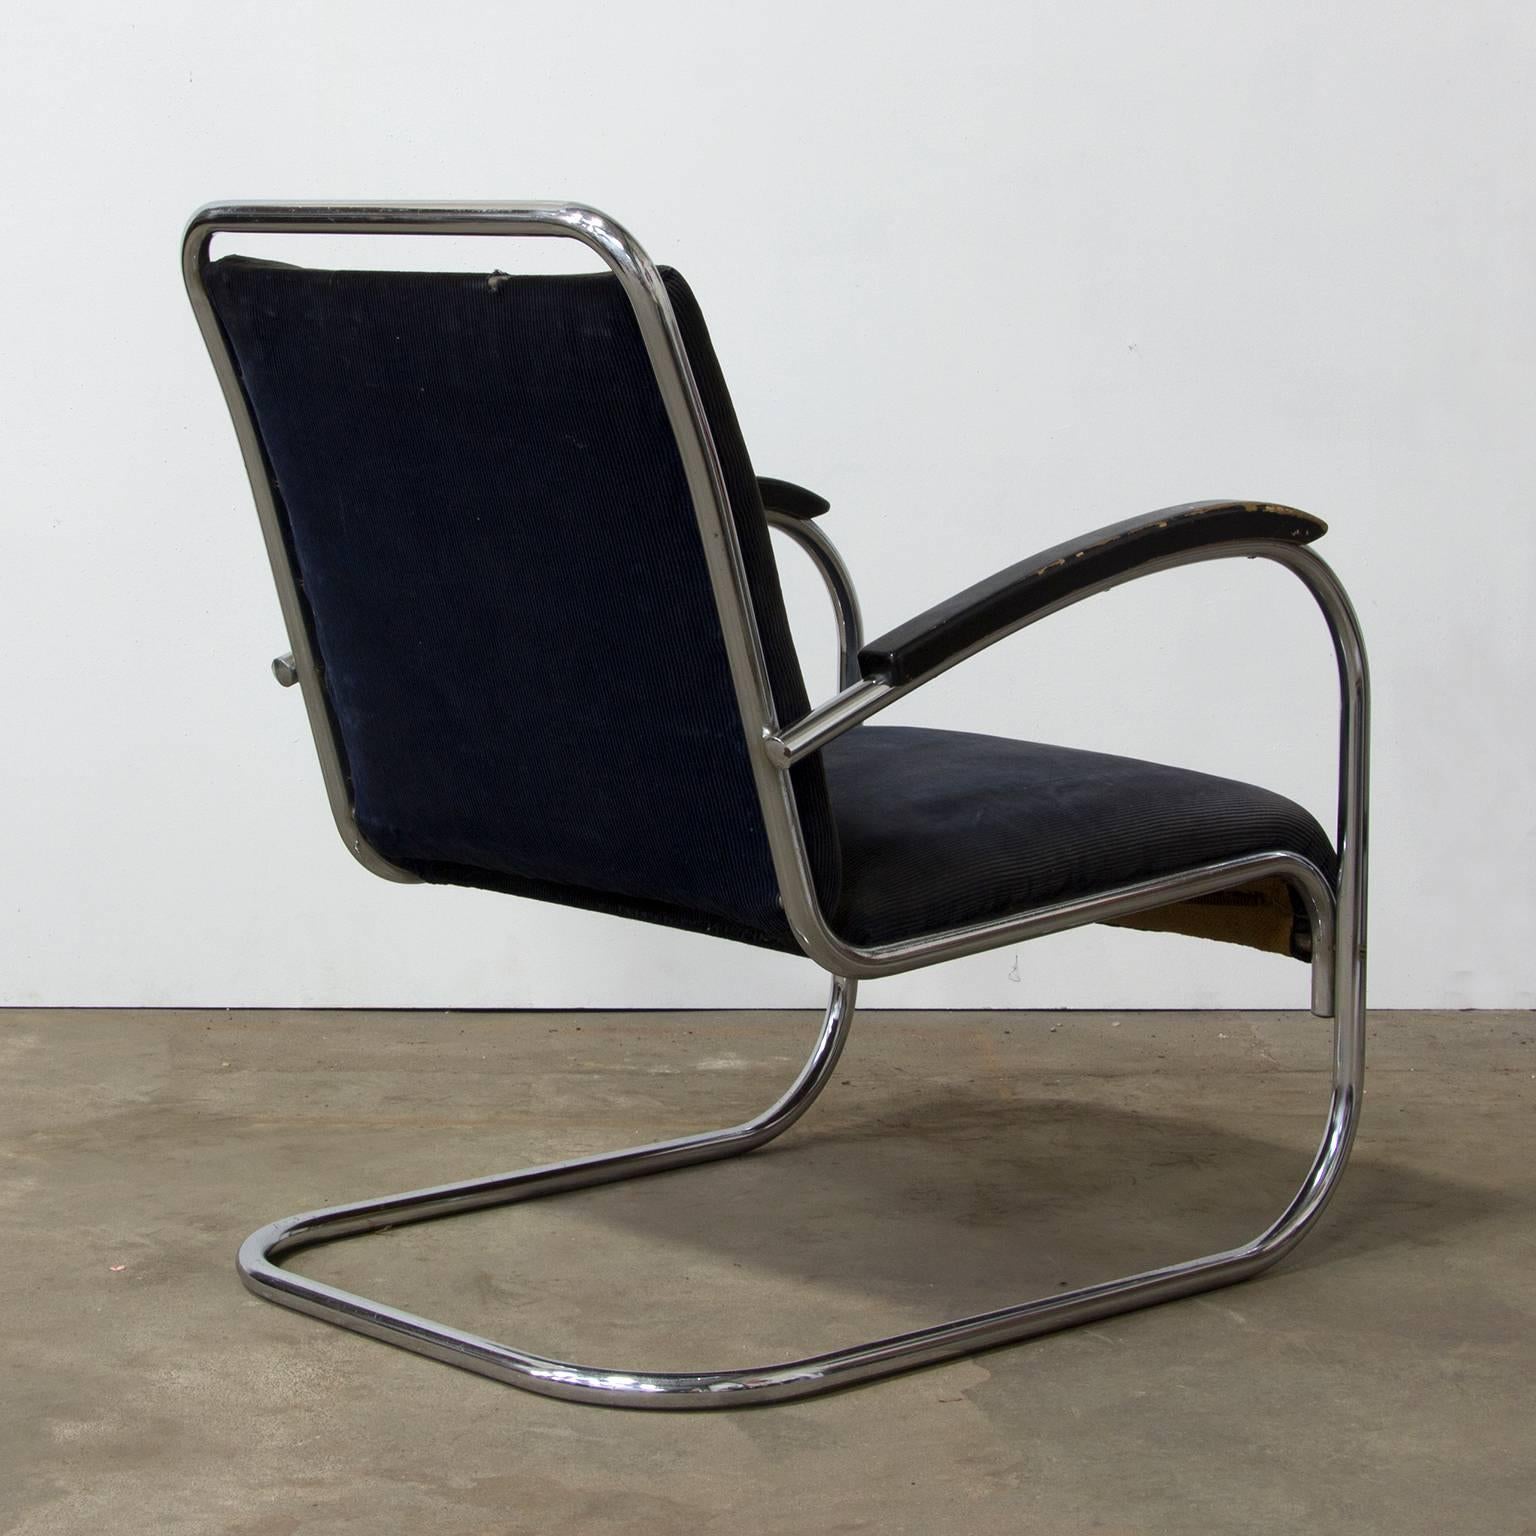 Bauhaus 1930s, Paul Schuitema Easy Chair, Fabric with Black Lacquered Wooden Armrests For Sale